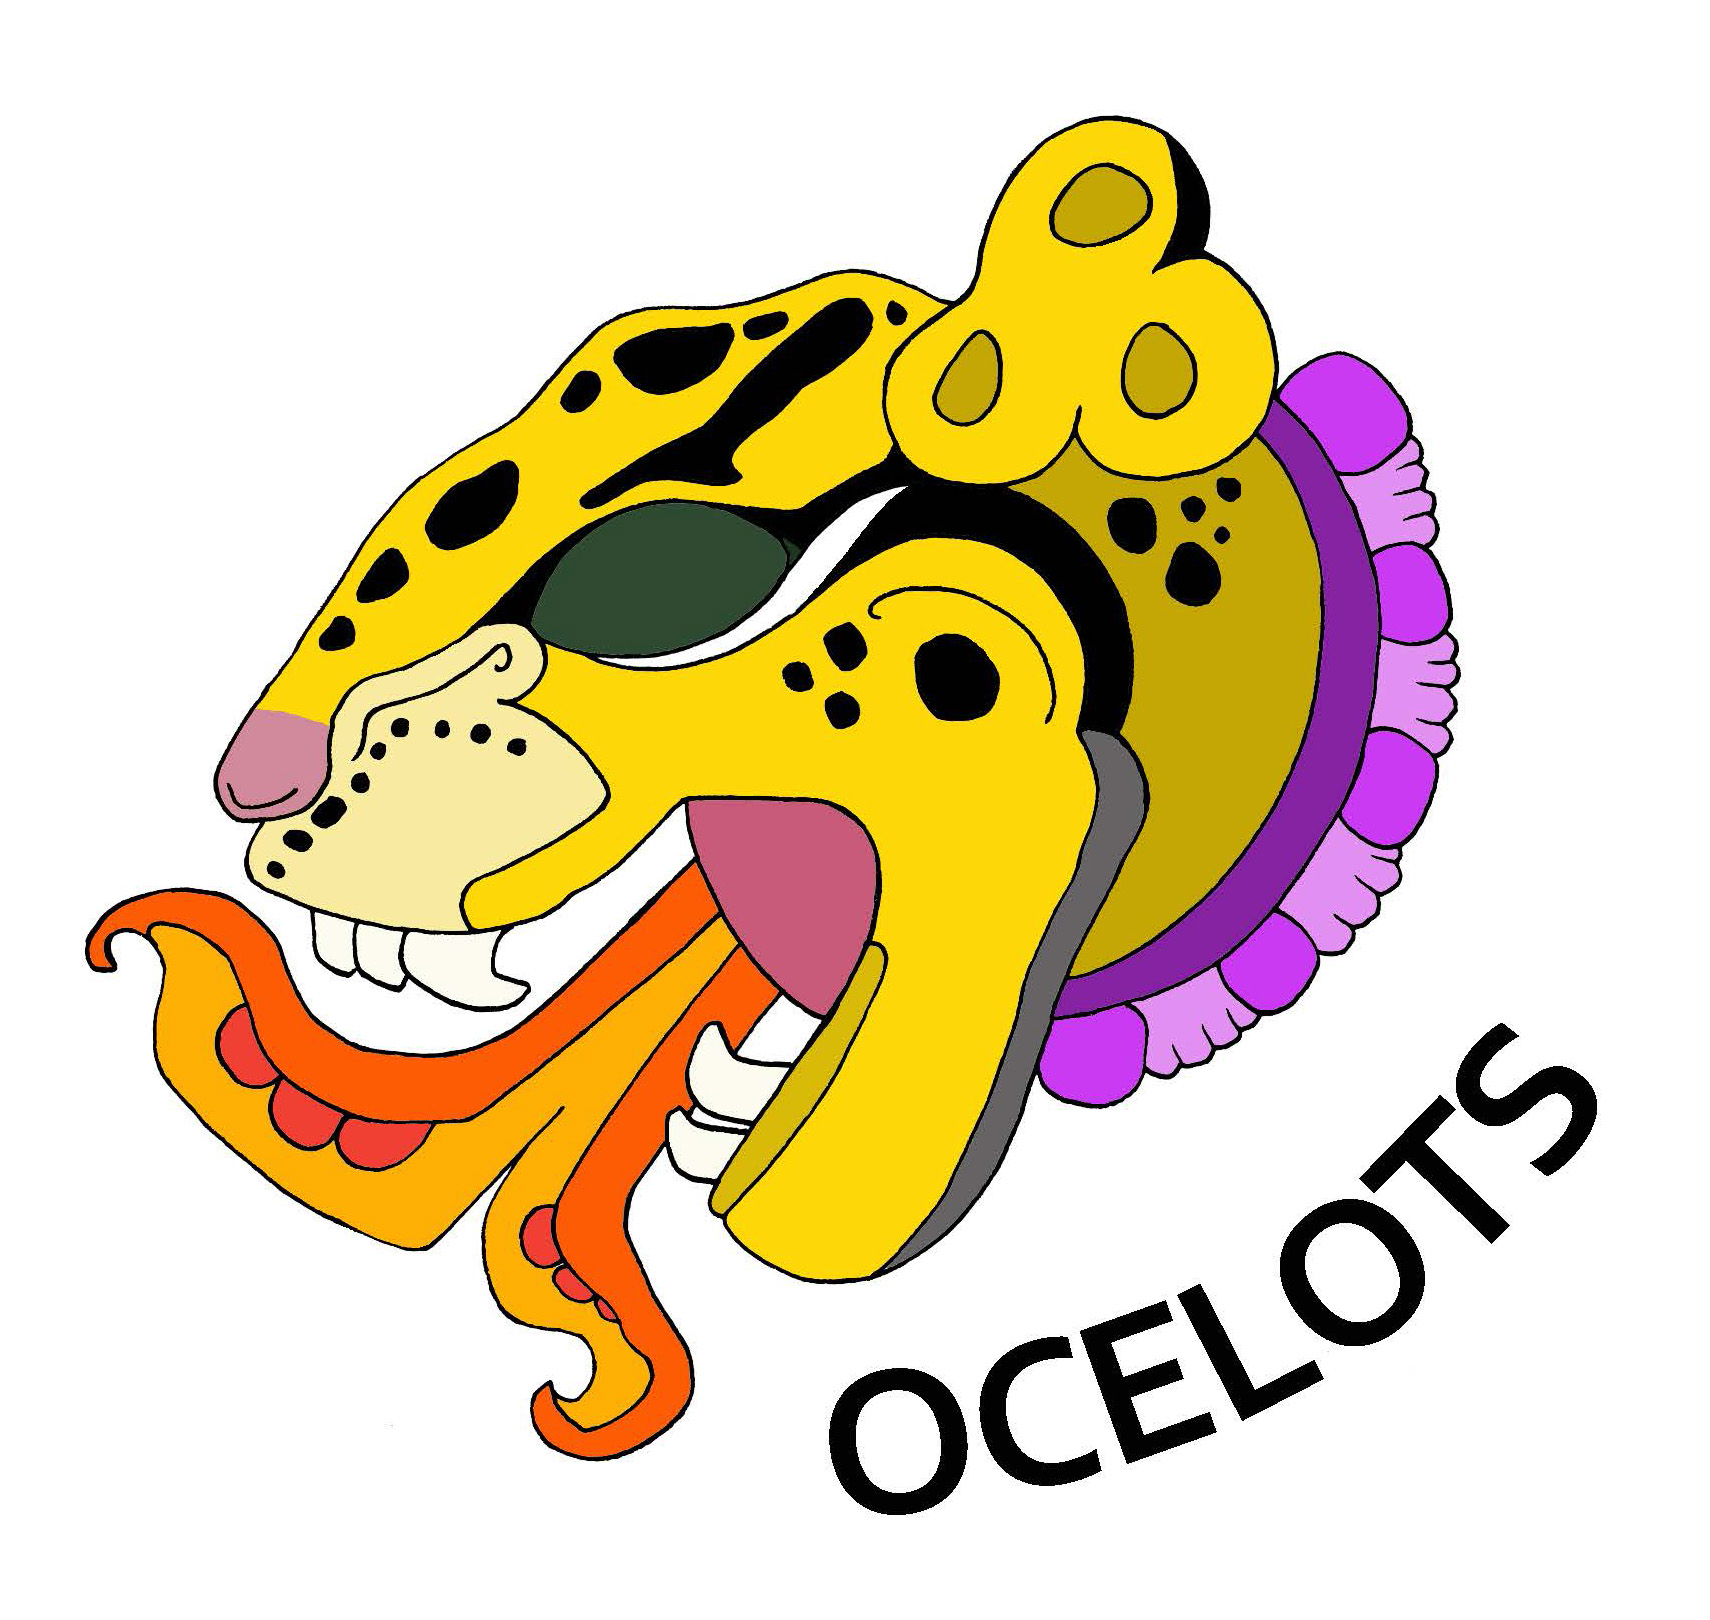 OCELOTS (Online Content for Experiential Learning of Tropical Systems)